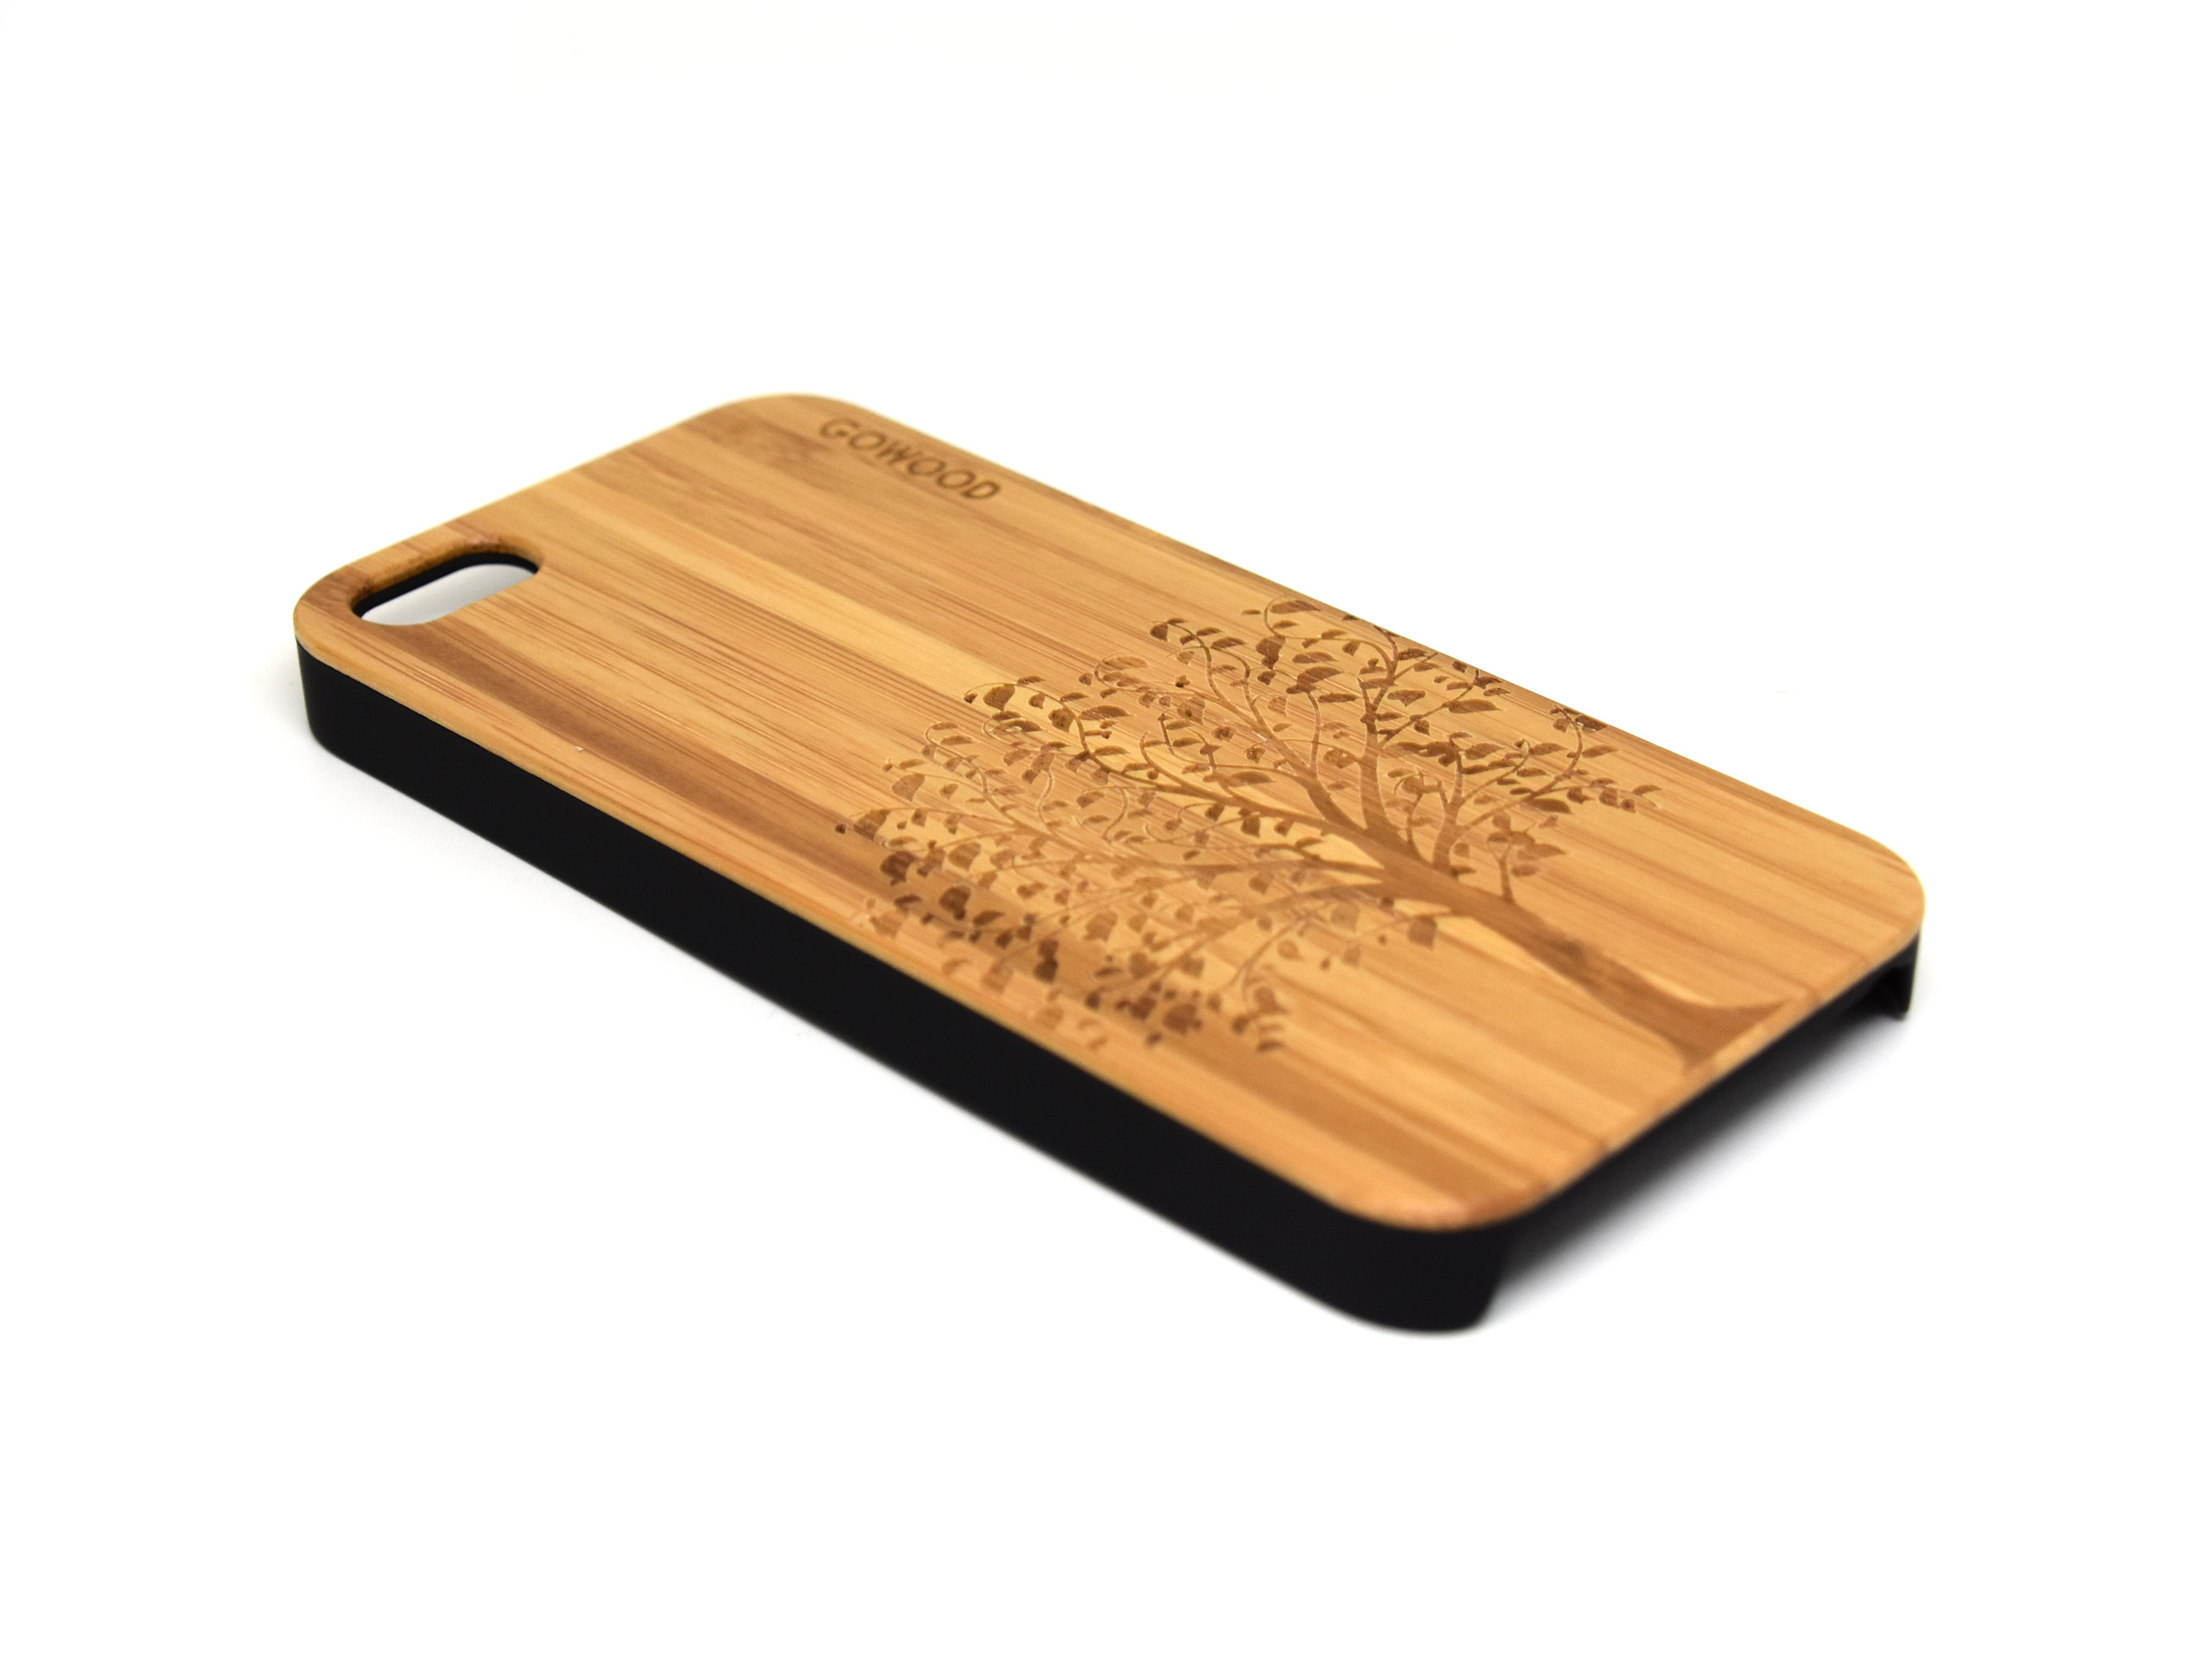 iphone 5 case bamboo wood with tree